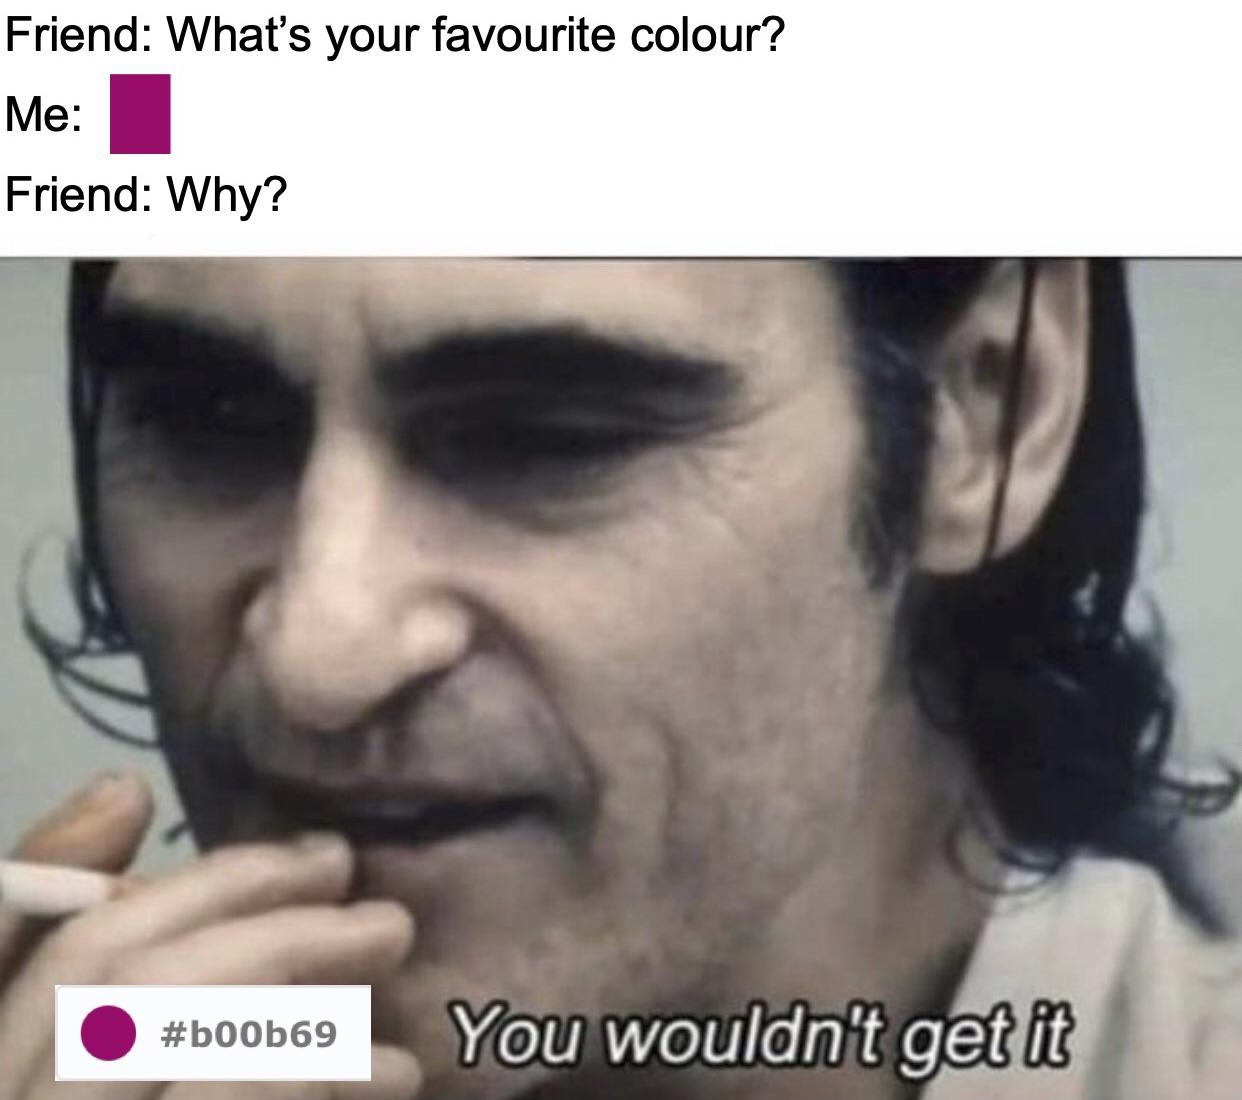 ifunny memes - Friend What's your favourite colour? Me Friend Why? You wouldn't get it